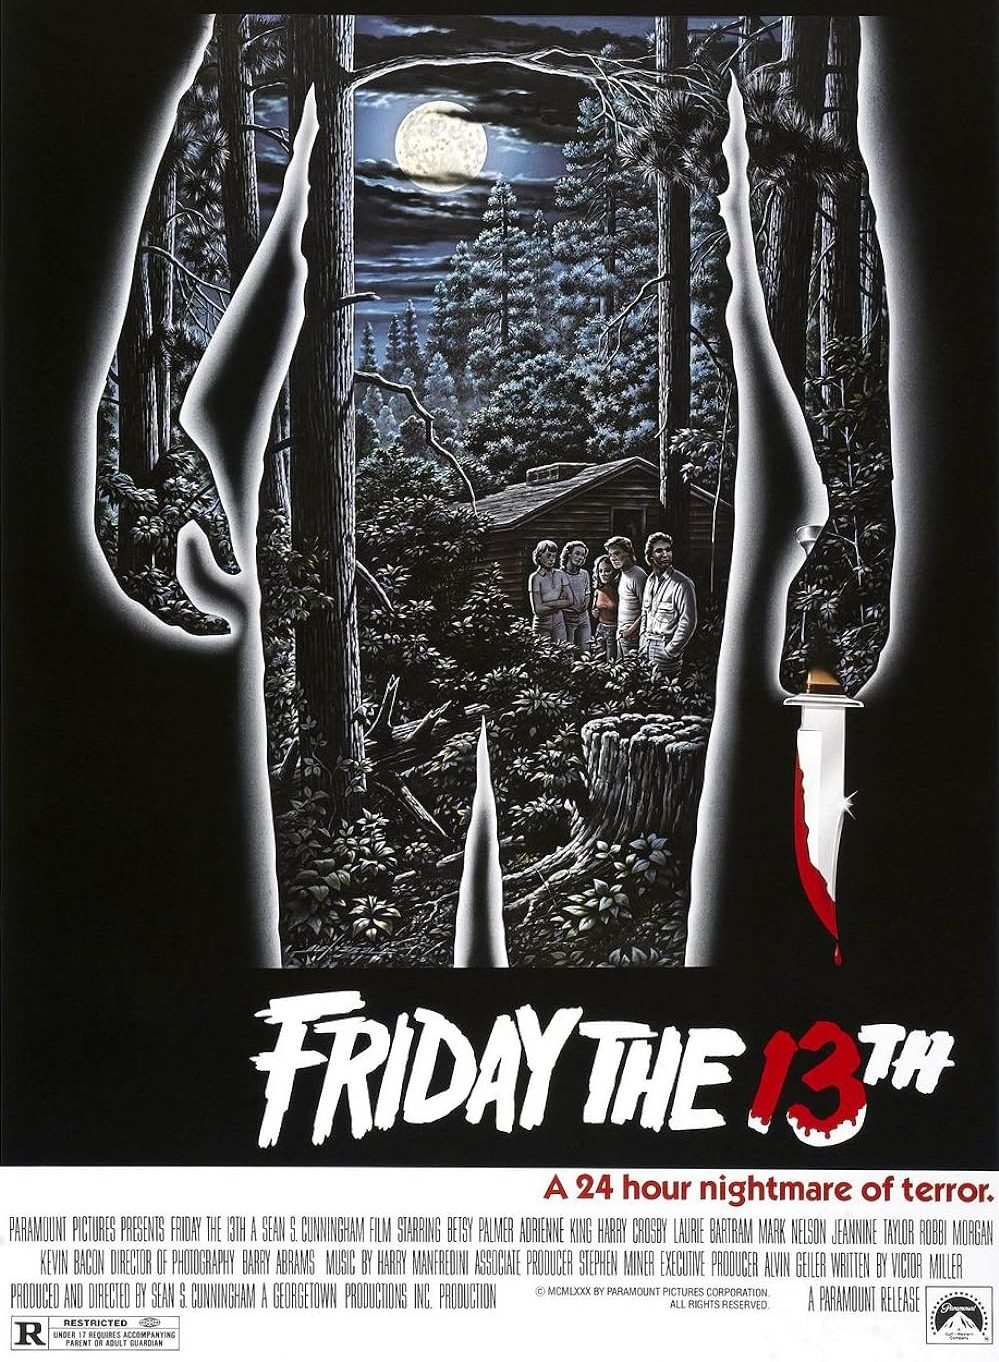 Jason Voorhees; Friday the 13th
(Provided by Paramount Pictures, Warner Bros., and New Line Cinema.)